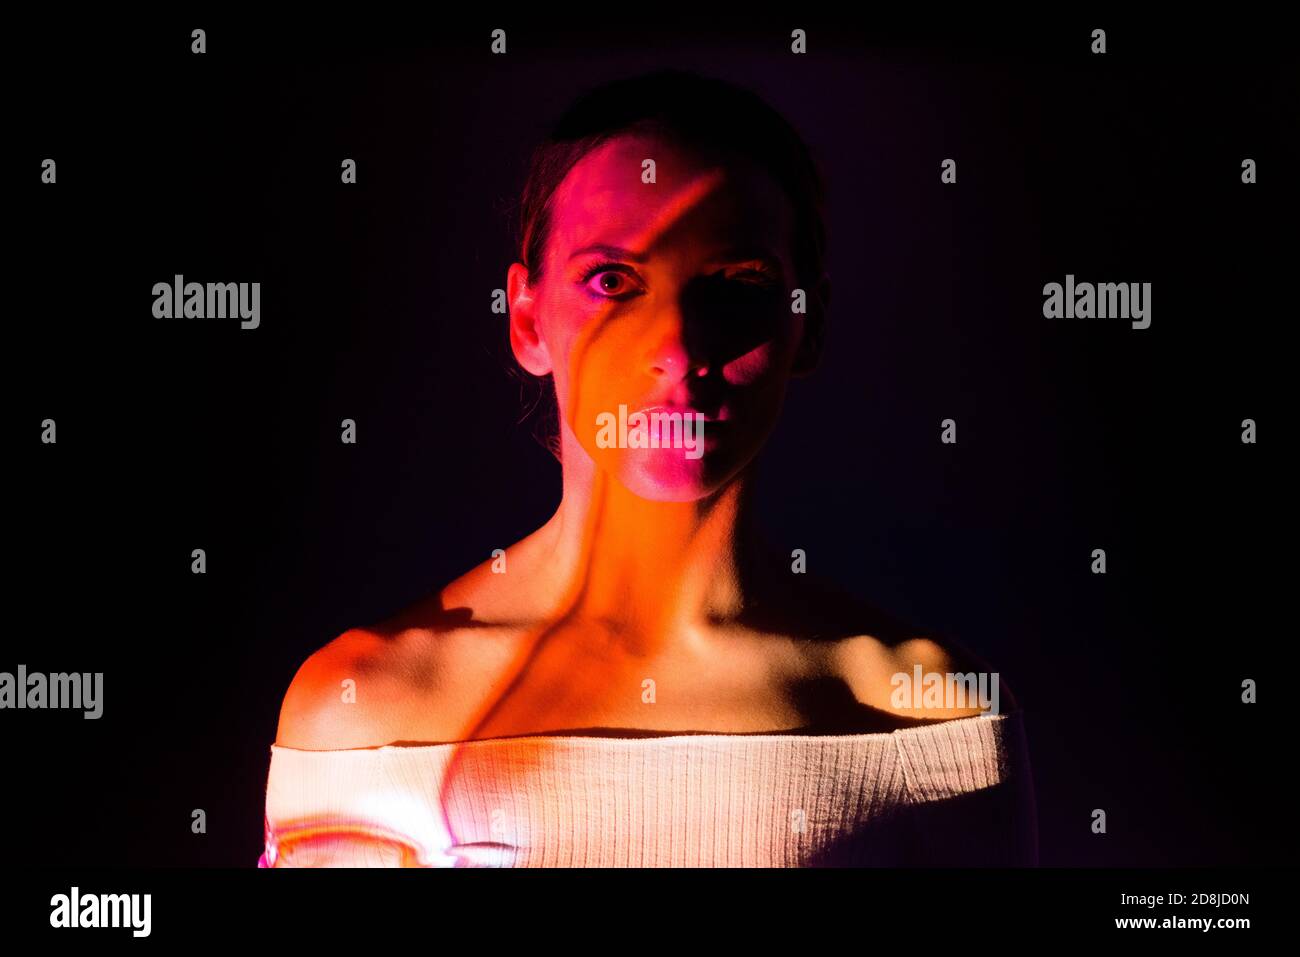 Creative portrait of a woman illuminated with colored lights on dark ...